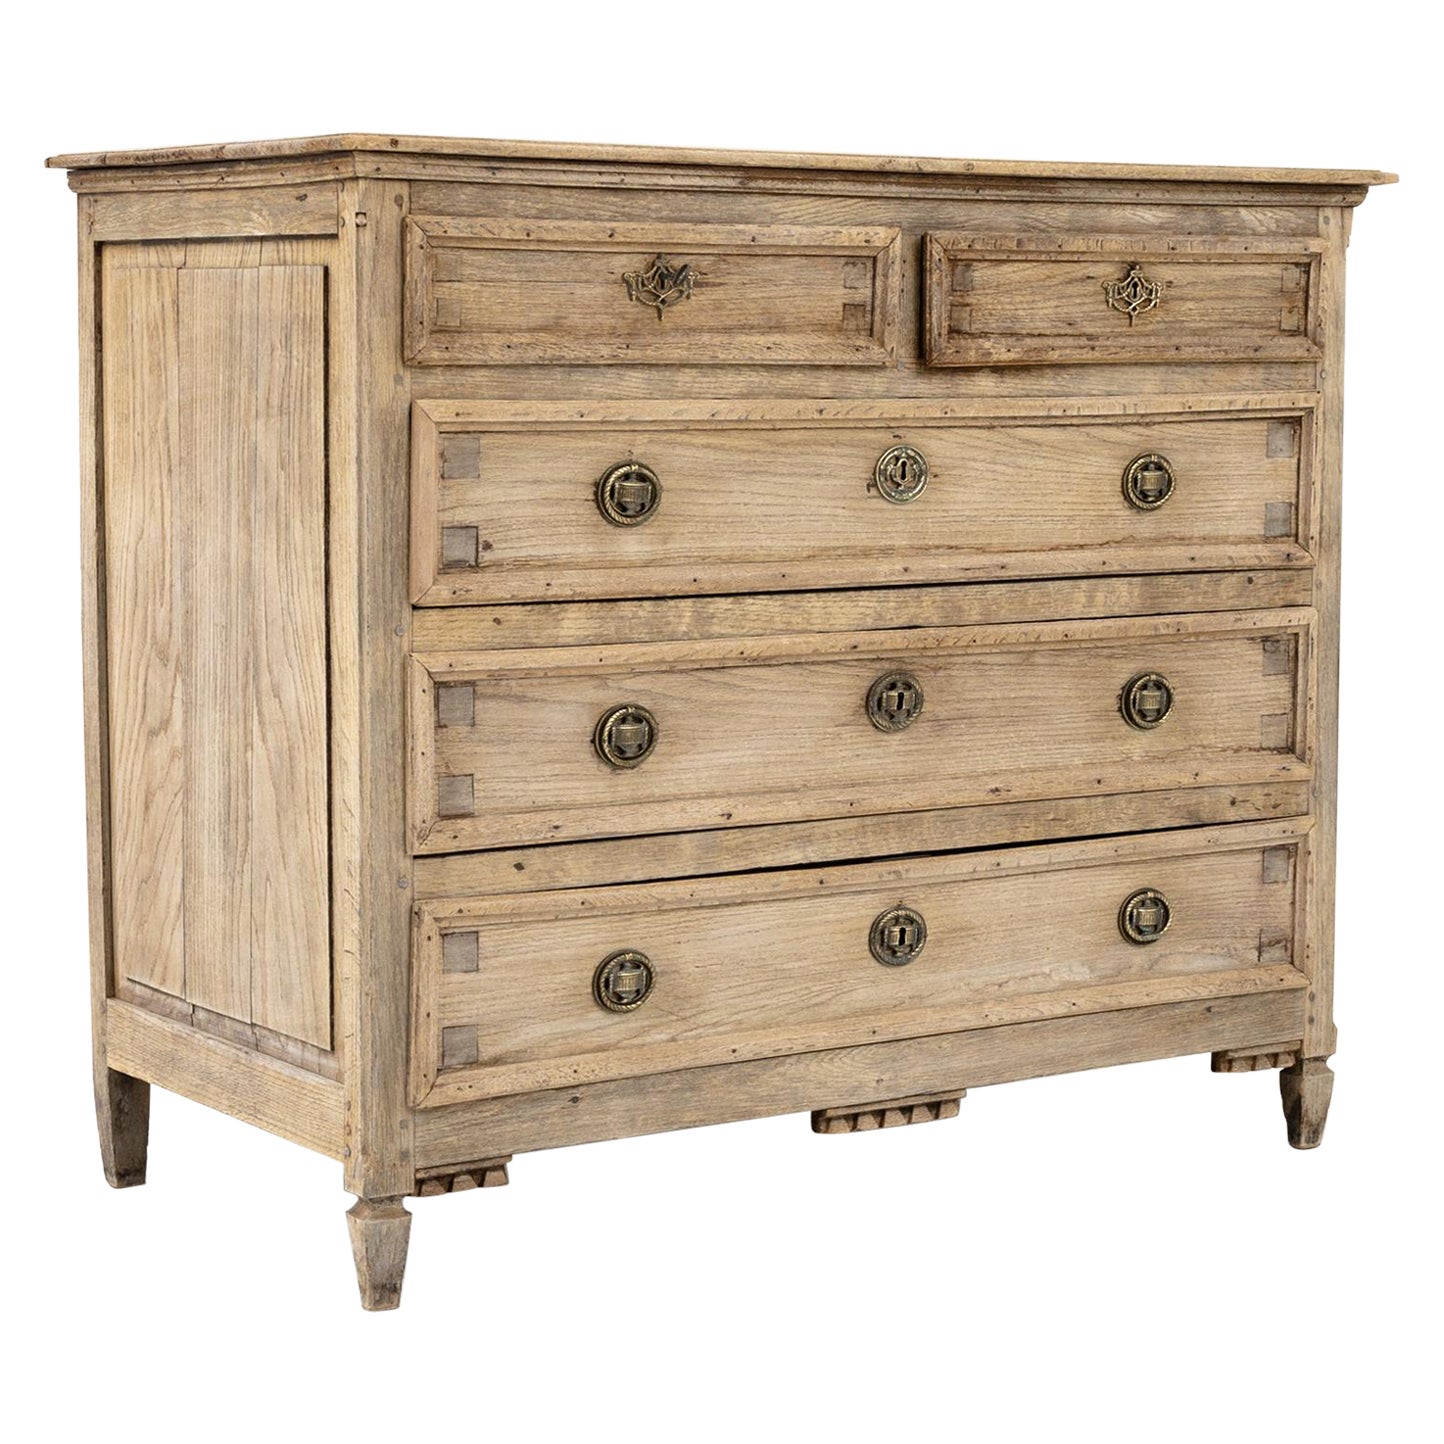 19th Century French Oak Drawer Chest